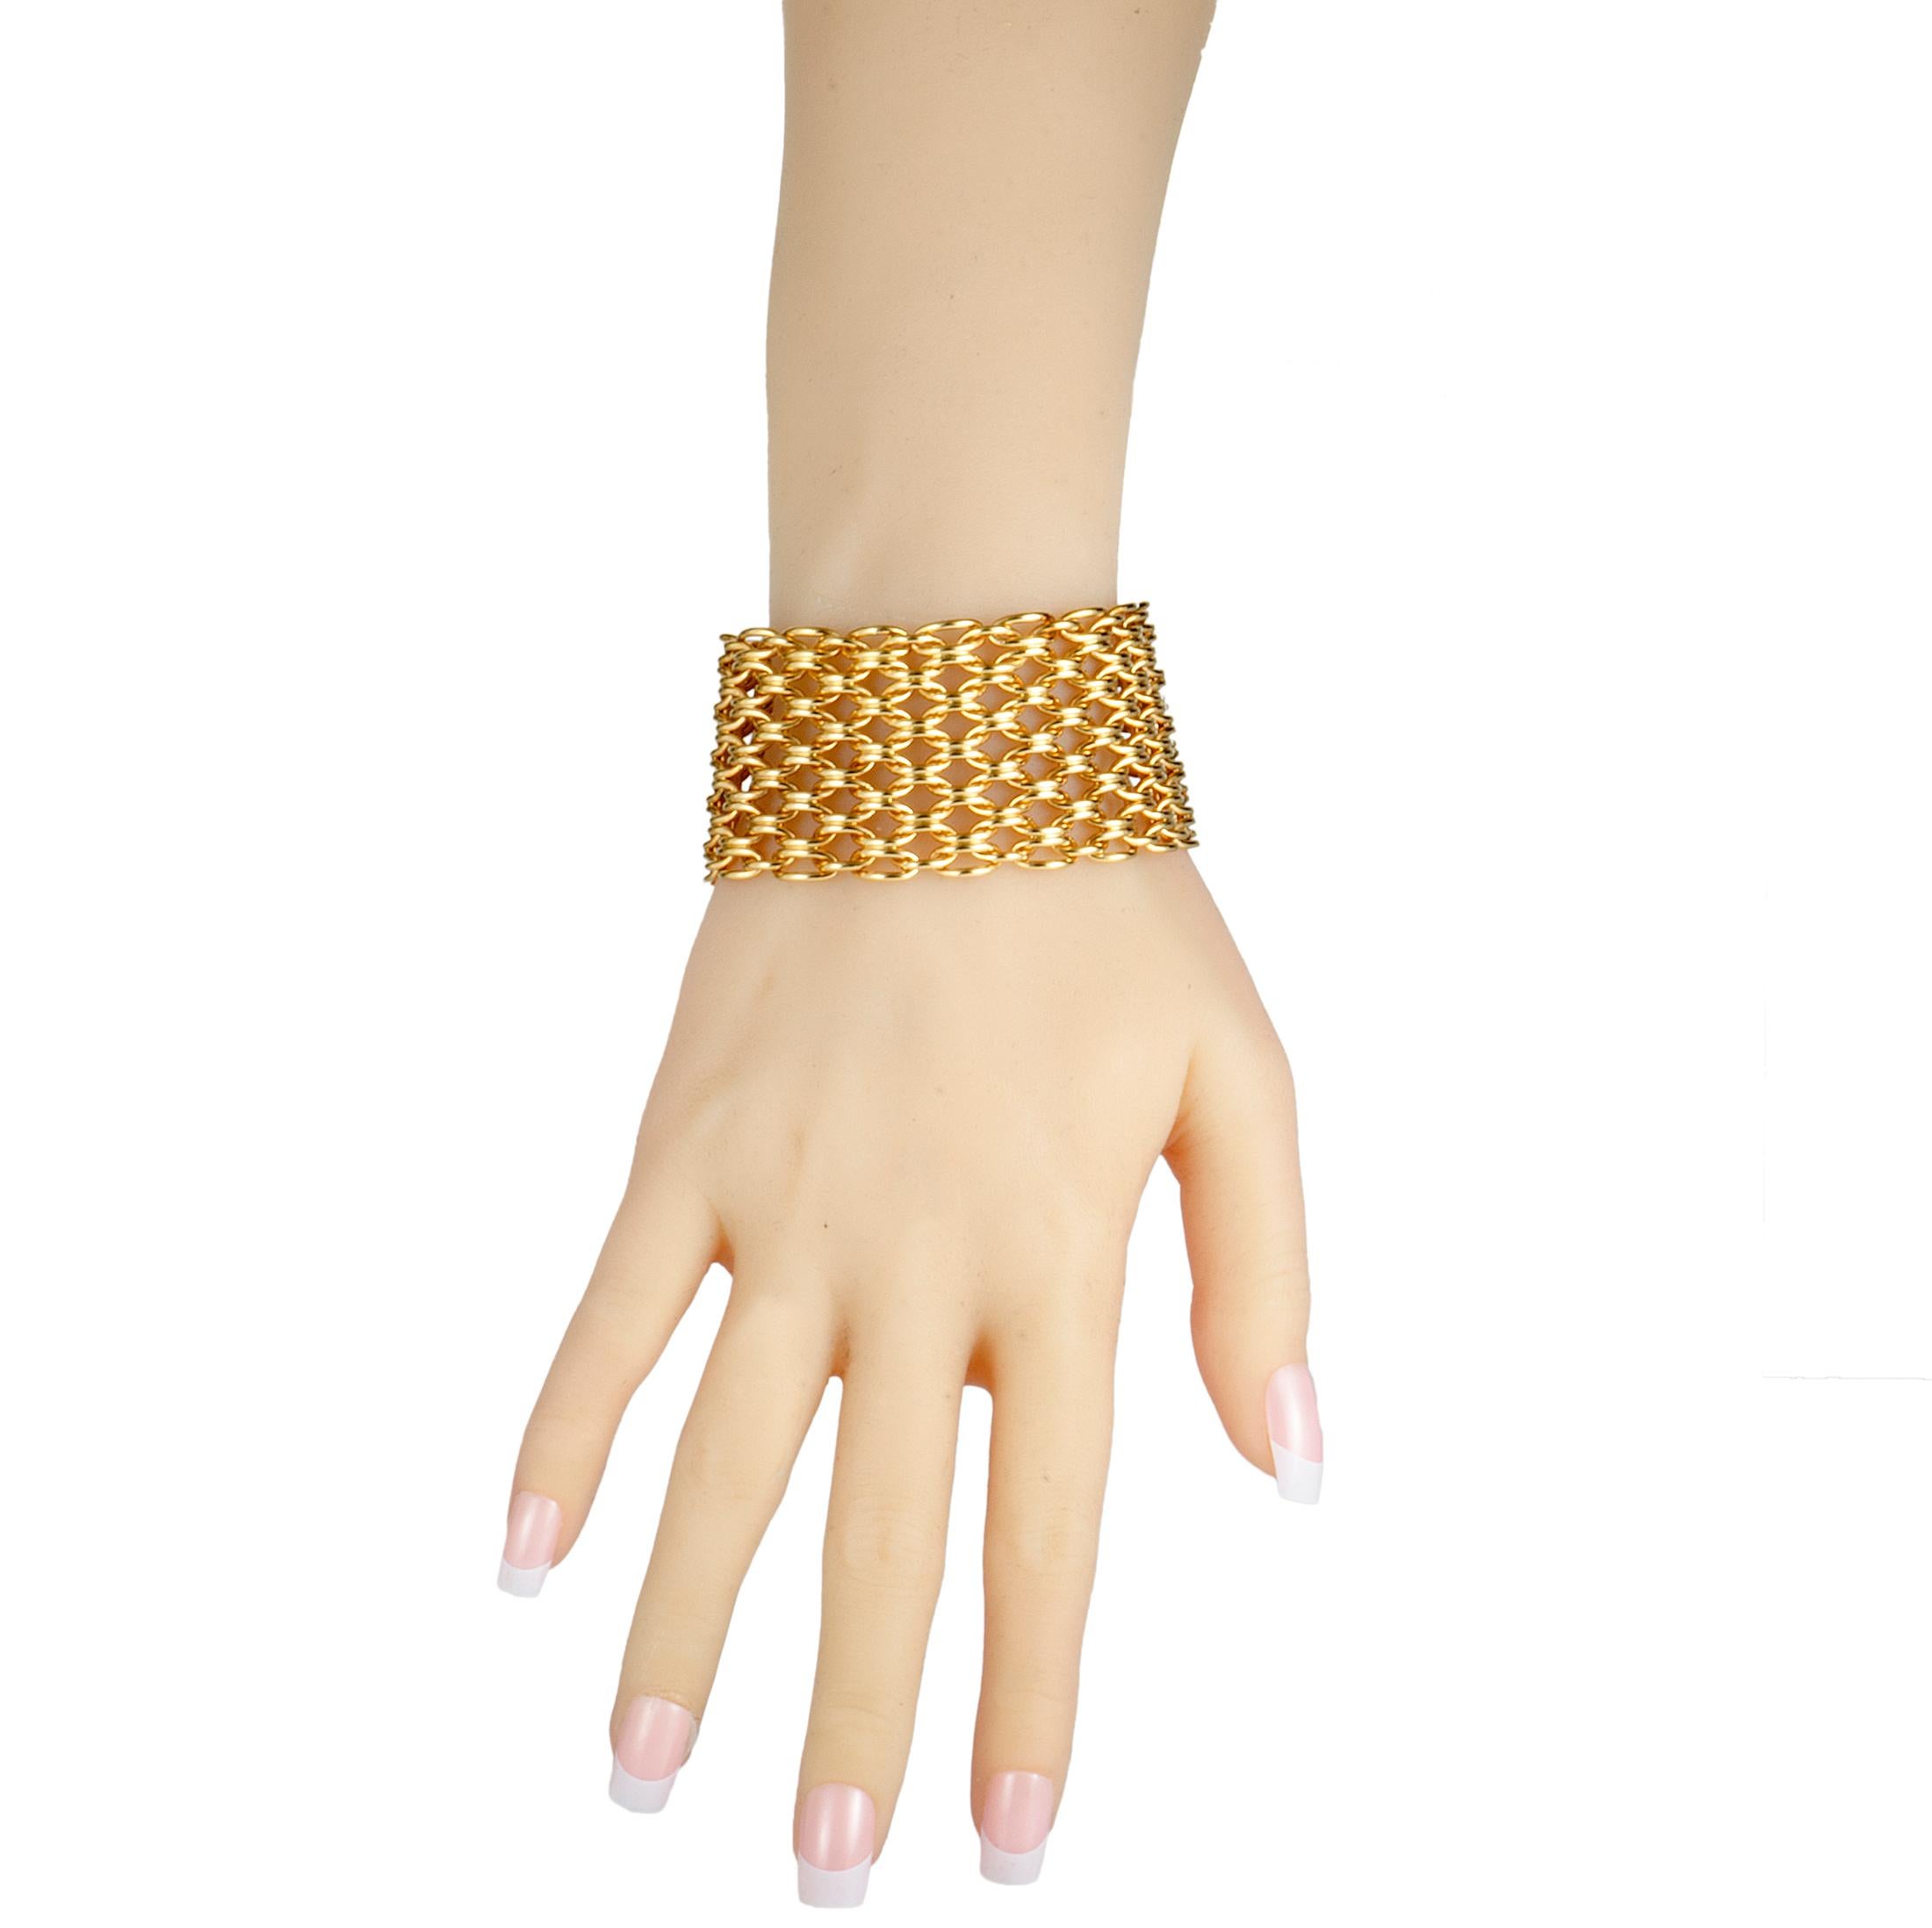 An enchantingly intricate design is beautifully presented in luxuriously radiant gold in this fabulous vintage piece that will add a distinctly fashionable touch to any ensemble of yours. The bracelet is created by Van Cleef & Arpels and it is